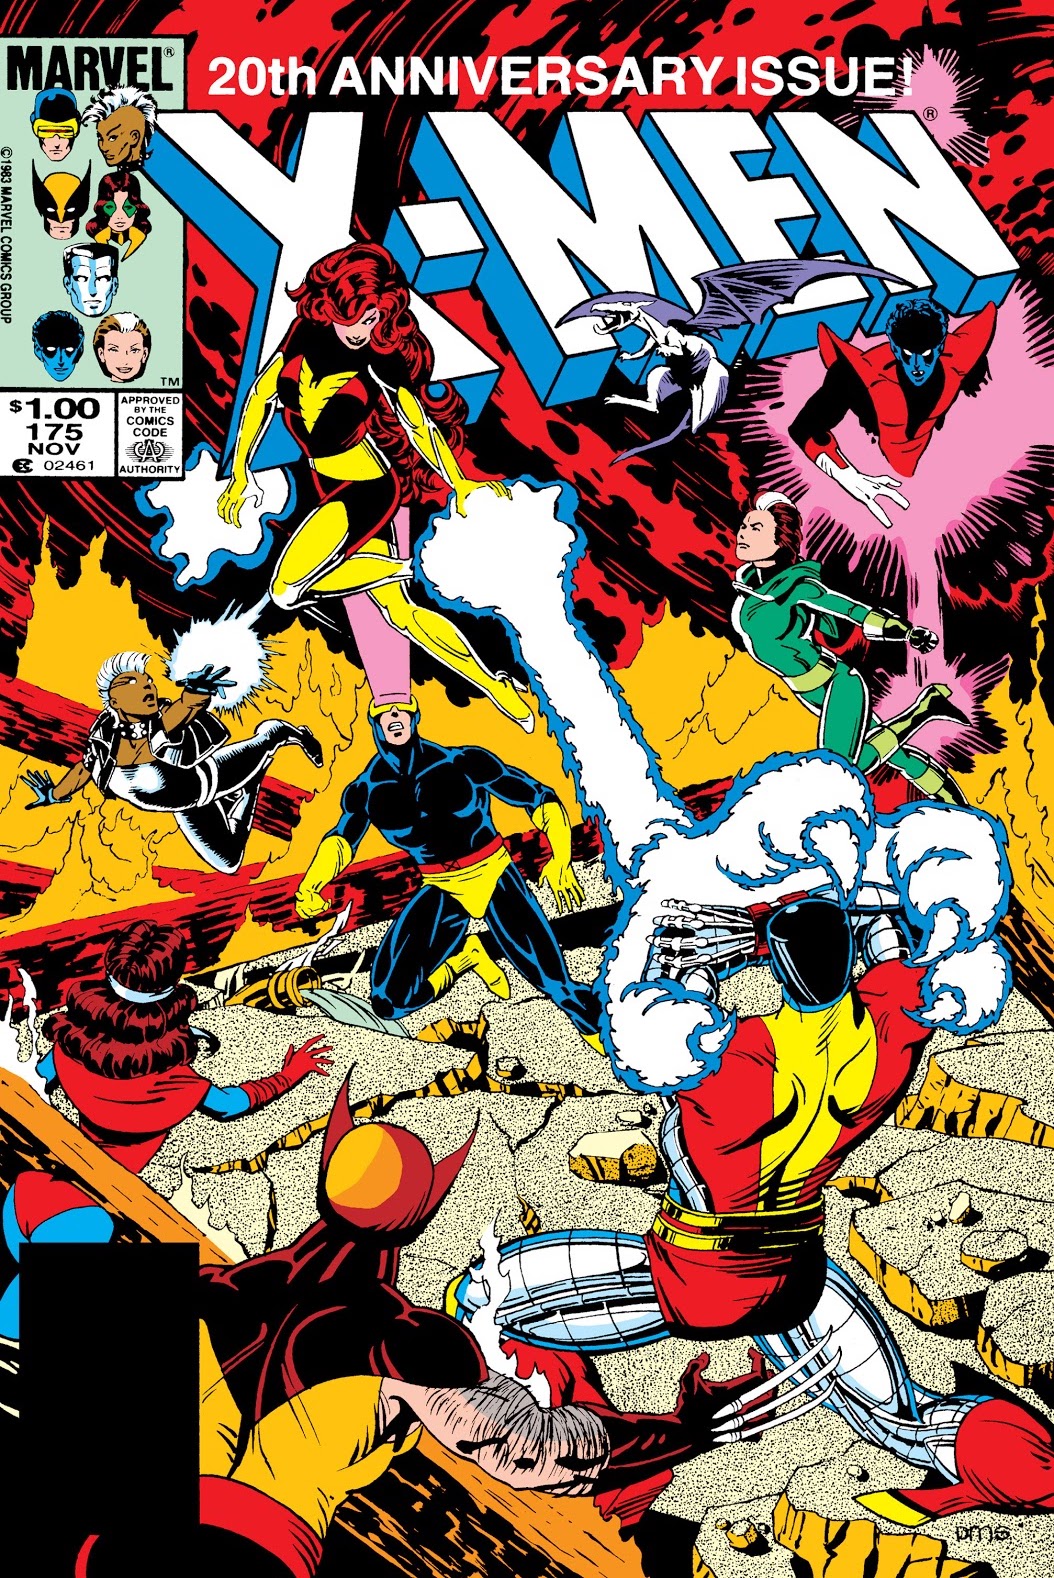 Dark Phoenix extending an energy claw out to Colossus as other X-Men surround her